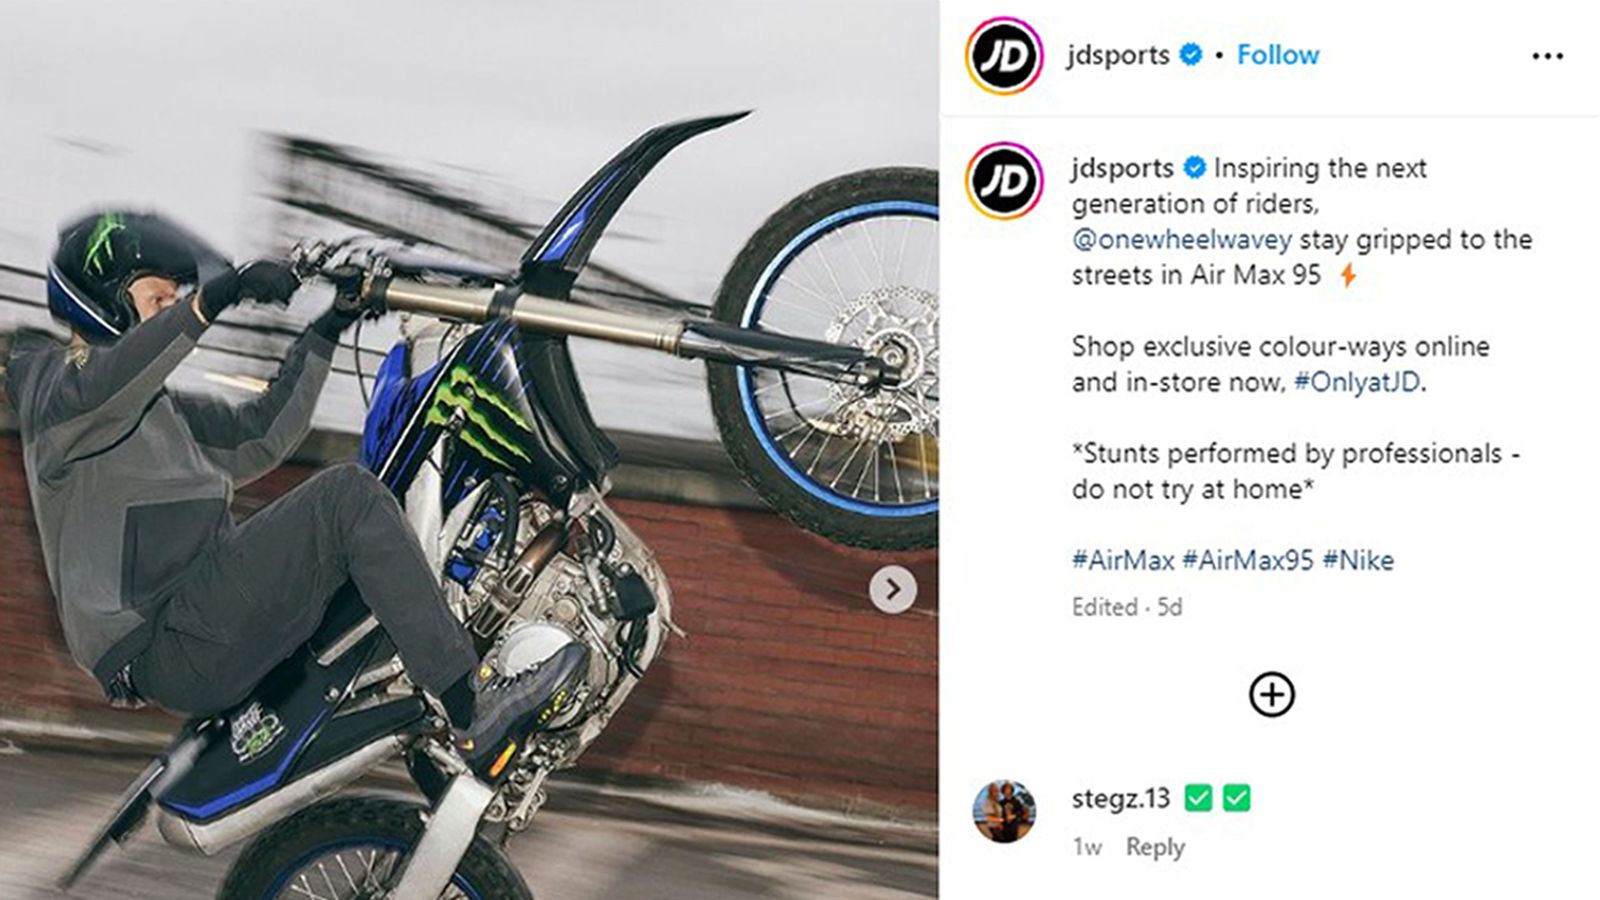 JD Sports under fire after 'irresponsible' advert showing motorcyclists wearing trainers